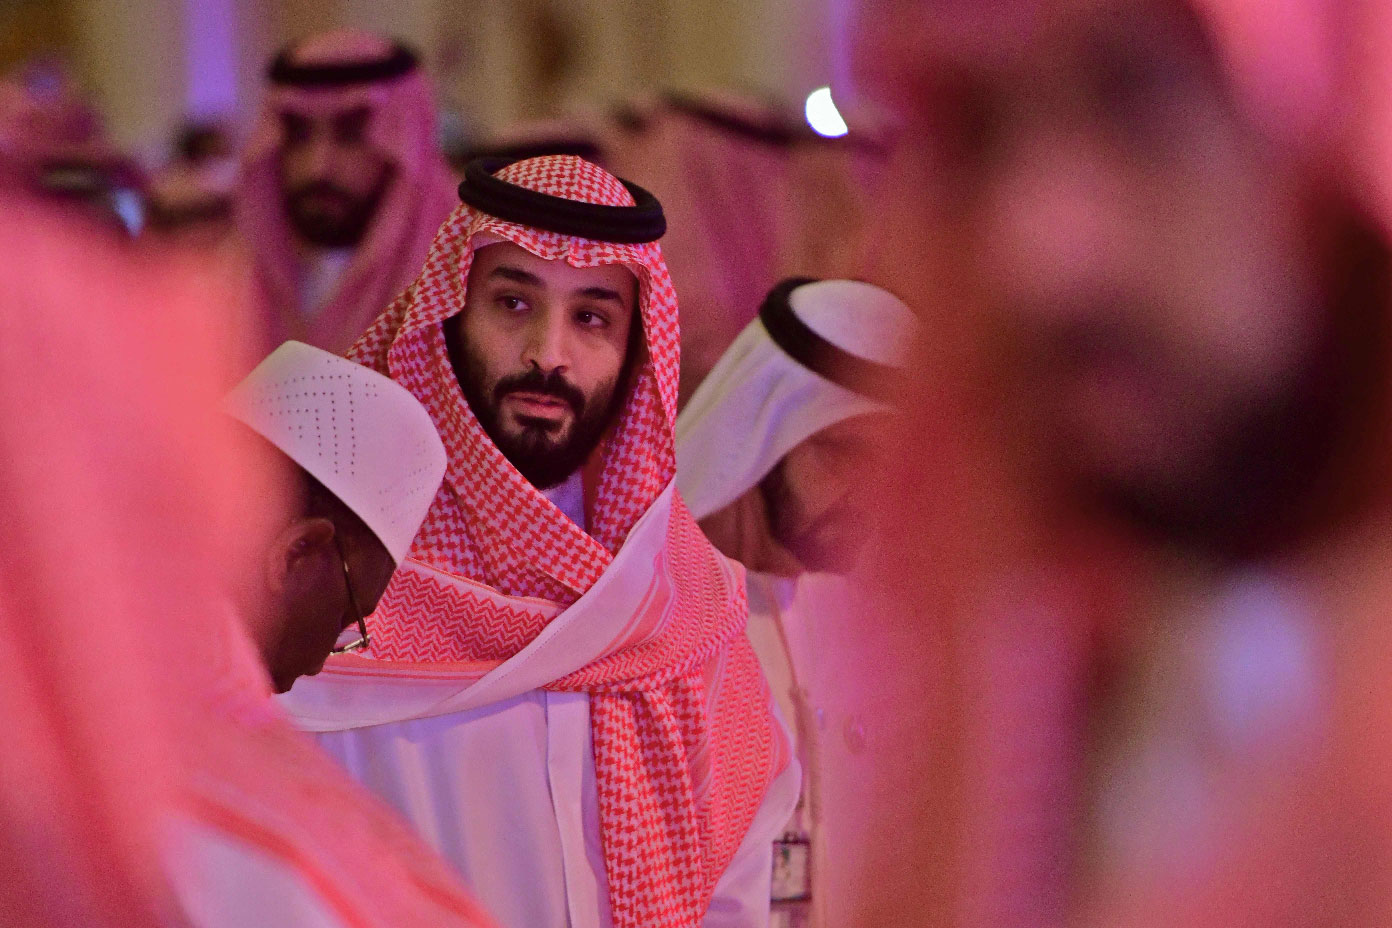 Saudi Crown Prince Mohammed bin Salman arrives at the Future Investment Initiative FII conference in the Saudi capital Riyadh on October 24, 2018.